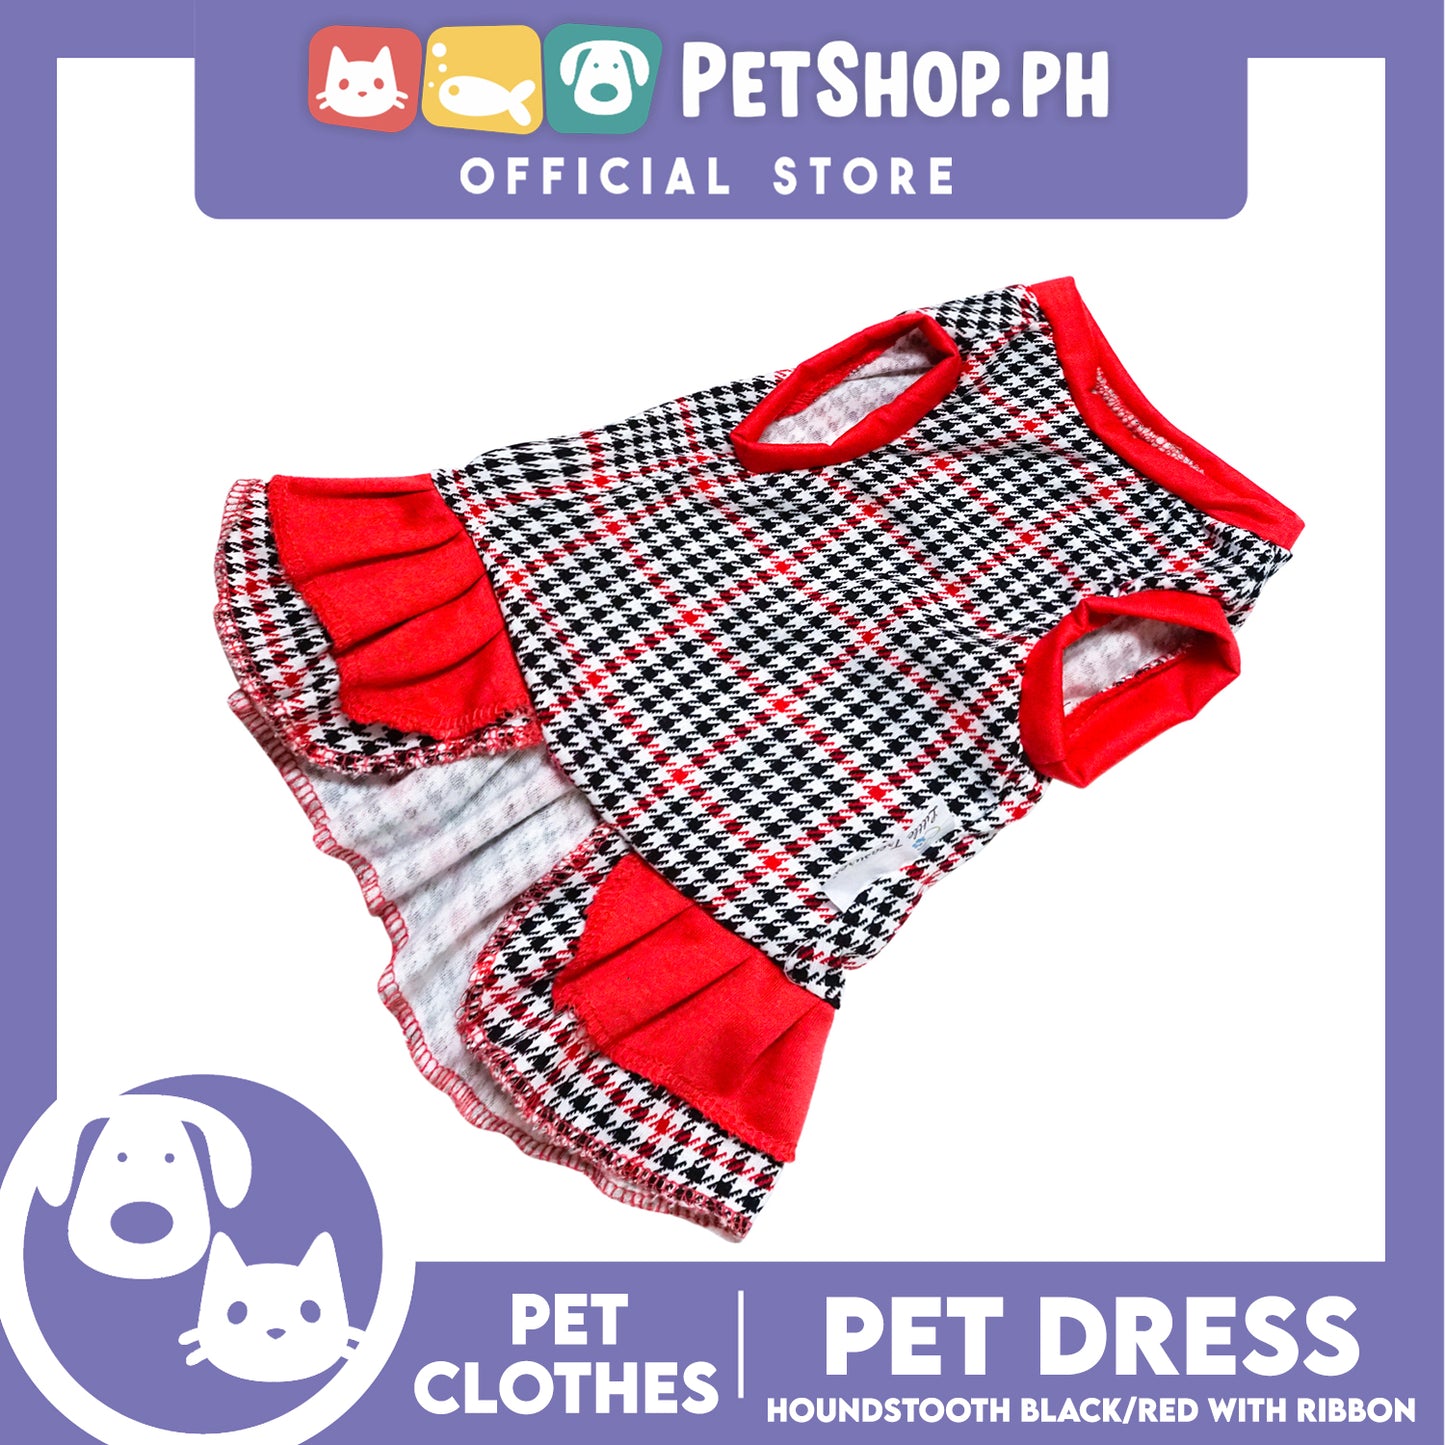 Pet Dress Houndstooth Black/Red with ribbon (Small) Pet Dress Clothes Perfect for Dogs